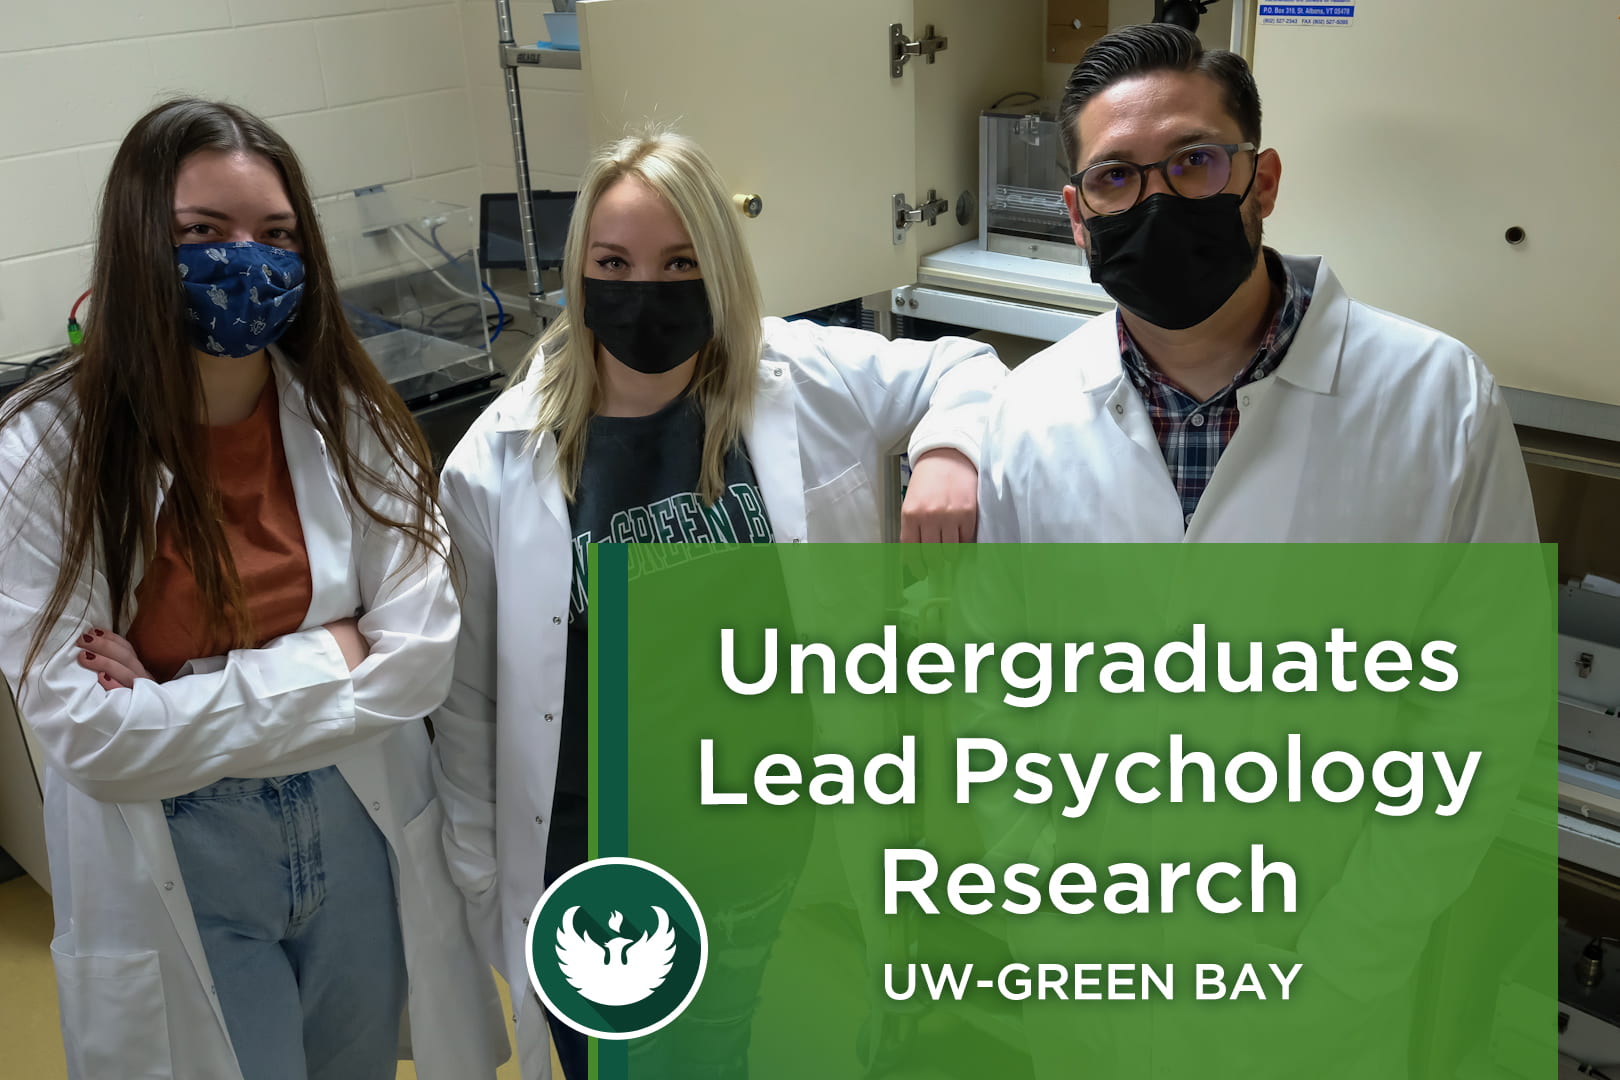 Two UW-Green Bay Psychology research students and Assistant Professor Todd Hillhouse pose for a photo inside the Pain and Addiction Neuropharmacology Lab (PANE Lab) in the Lab Sciences building at the Green Bay Campus.